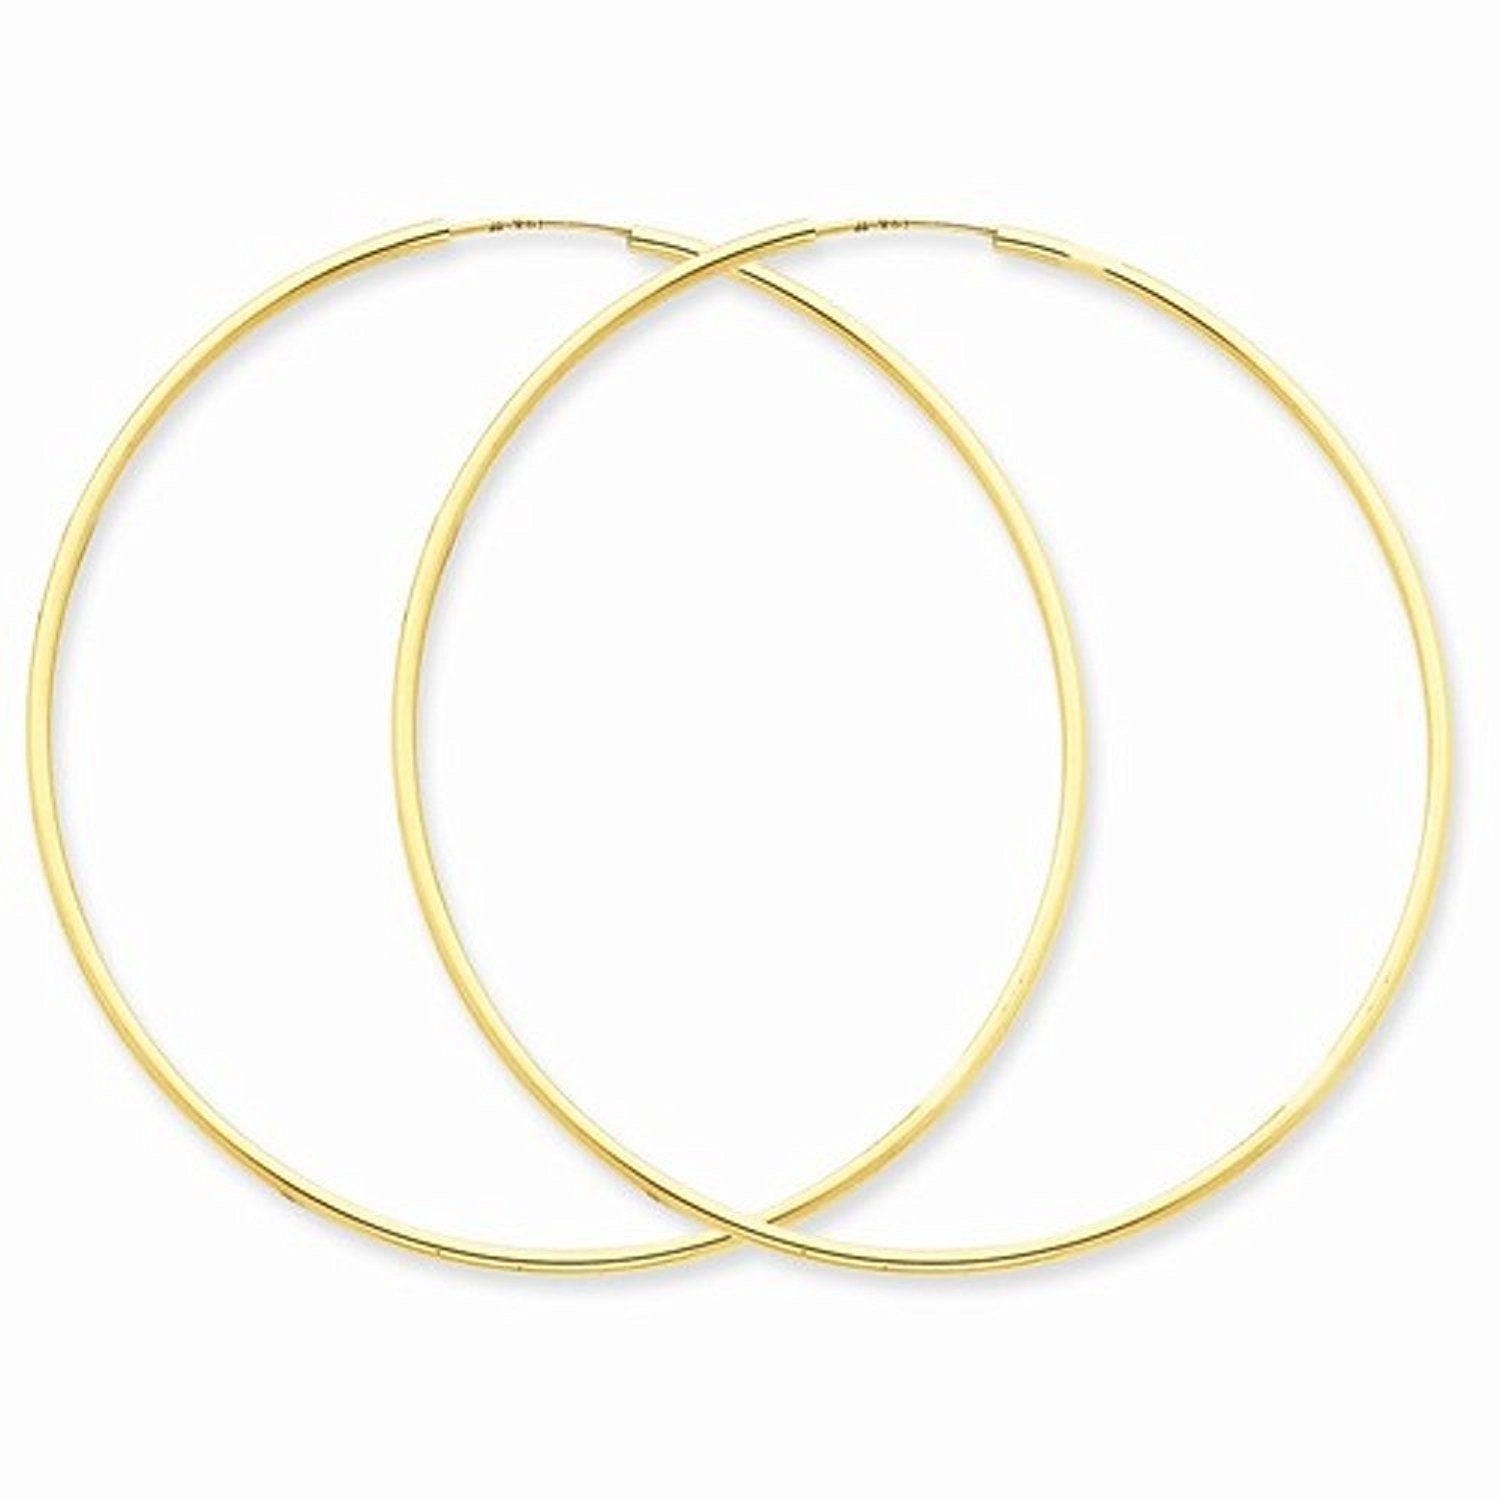 14k Yellow Gold Large Classic Endless Round Hoop Earrings 55mm x 1.5mm